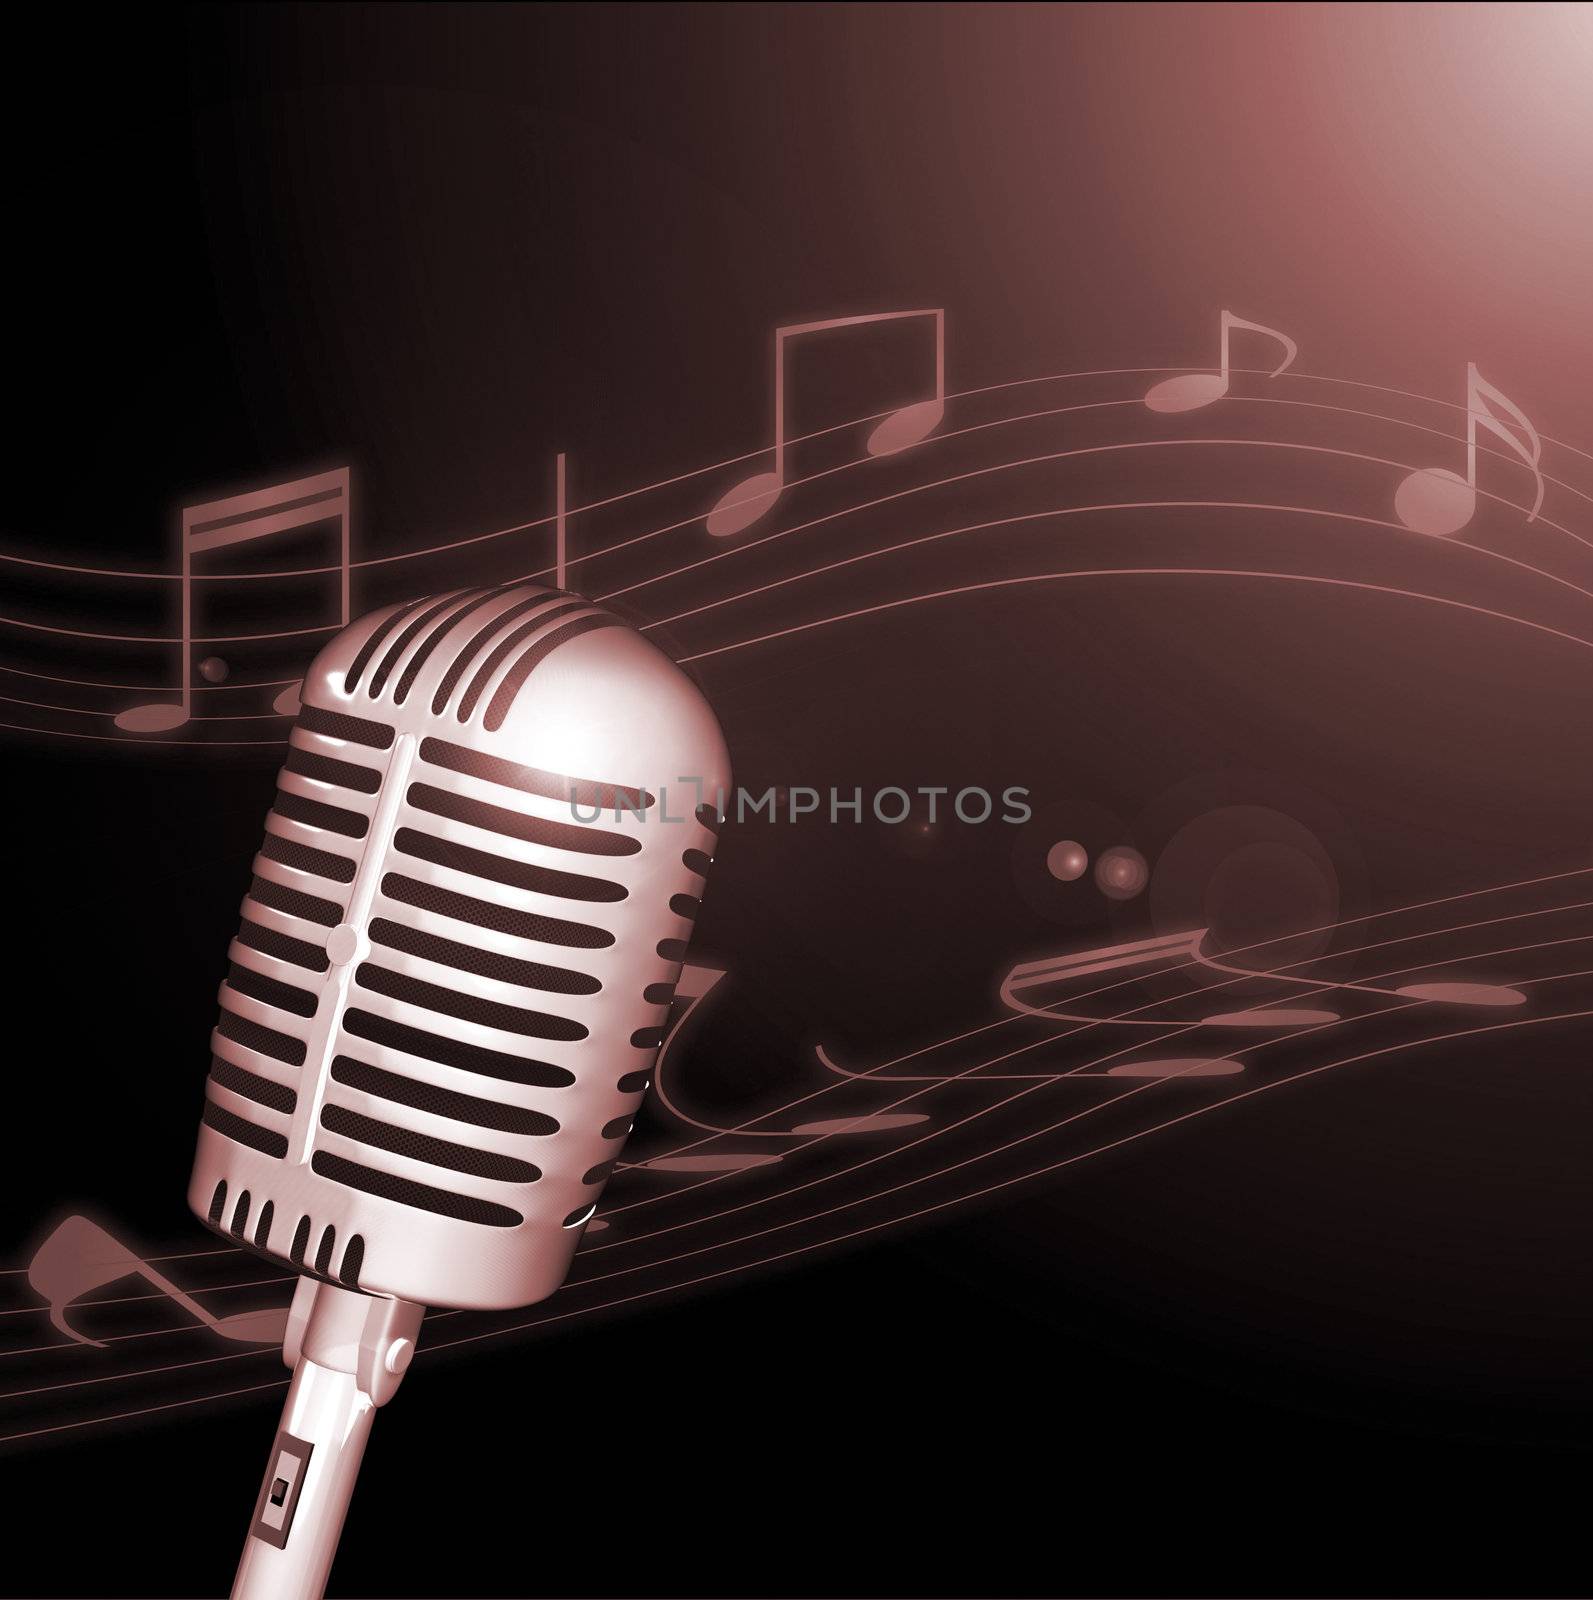 Image of a retro microphone with musical notes in the background.